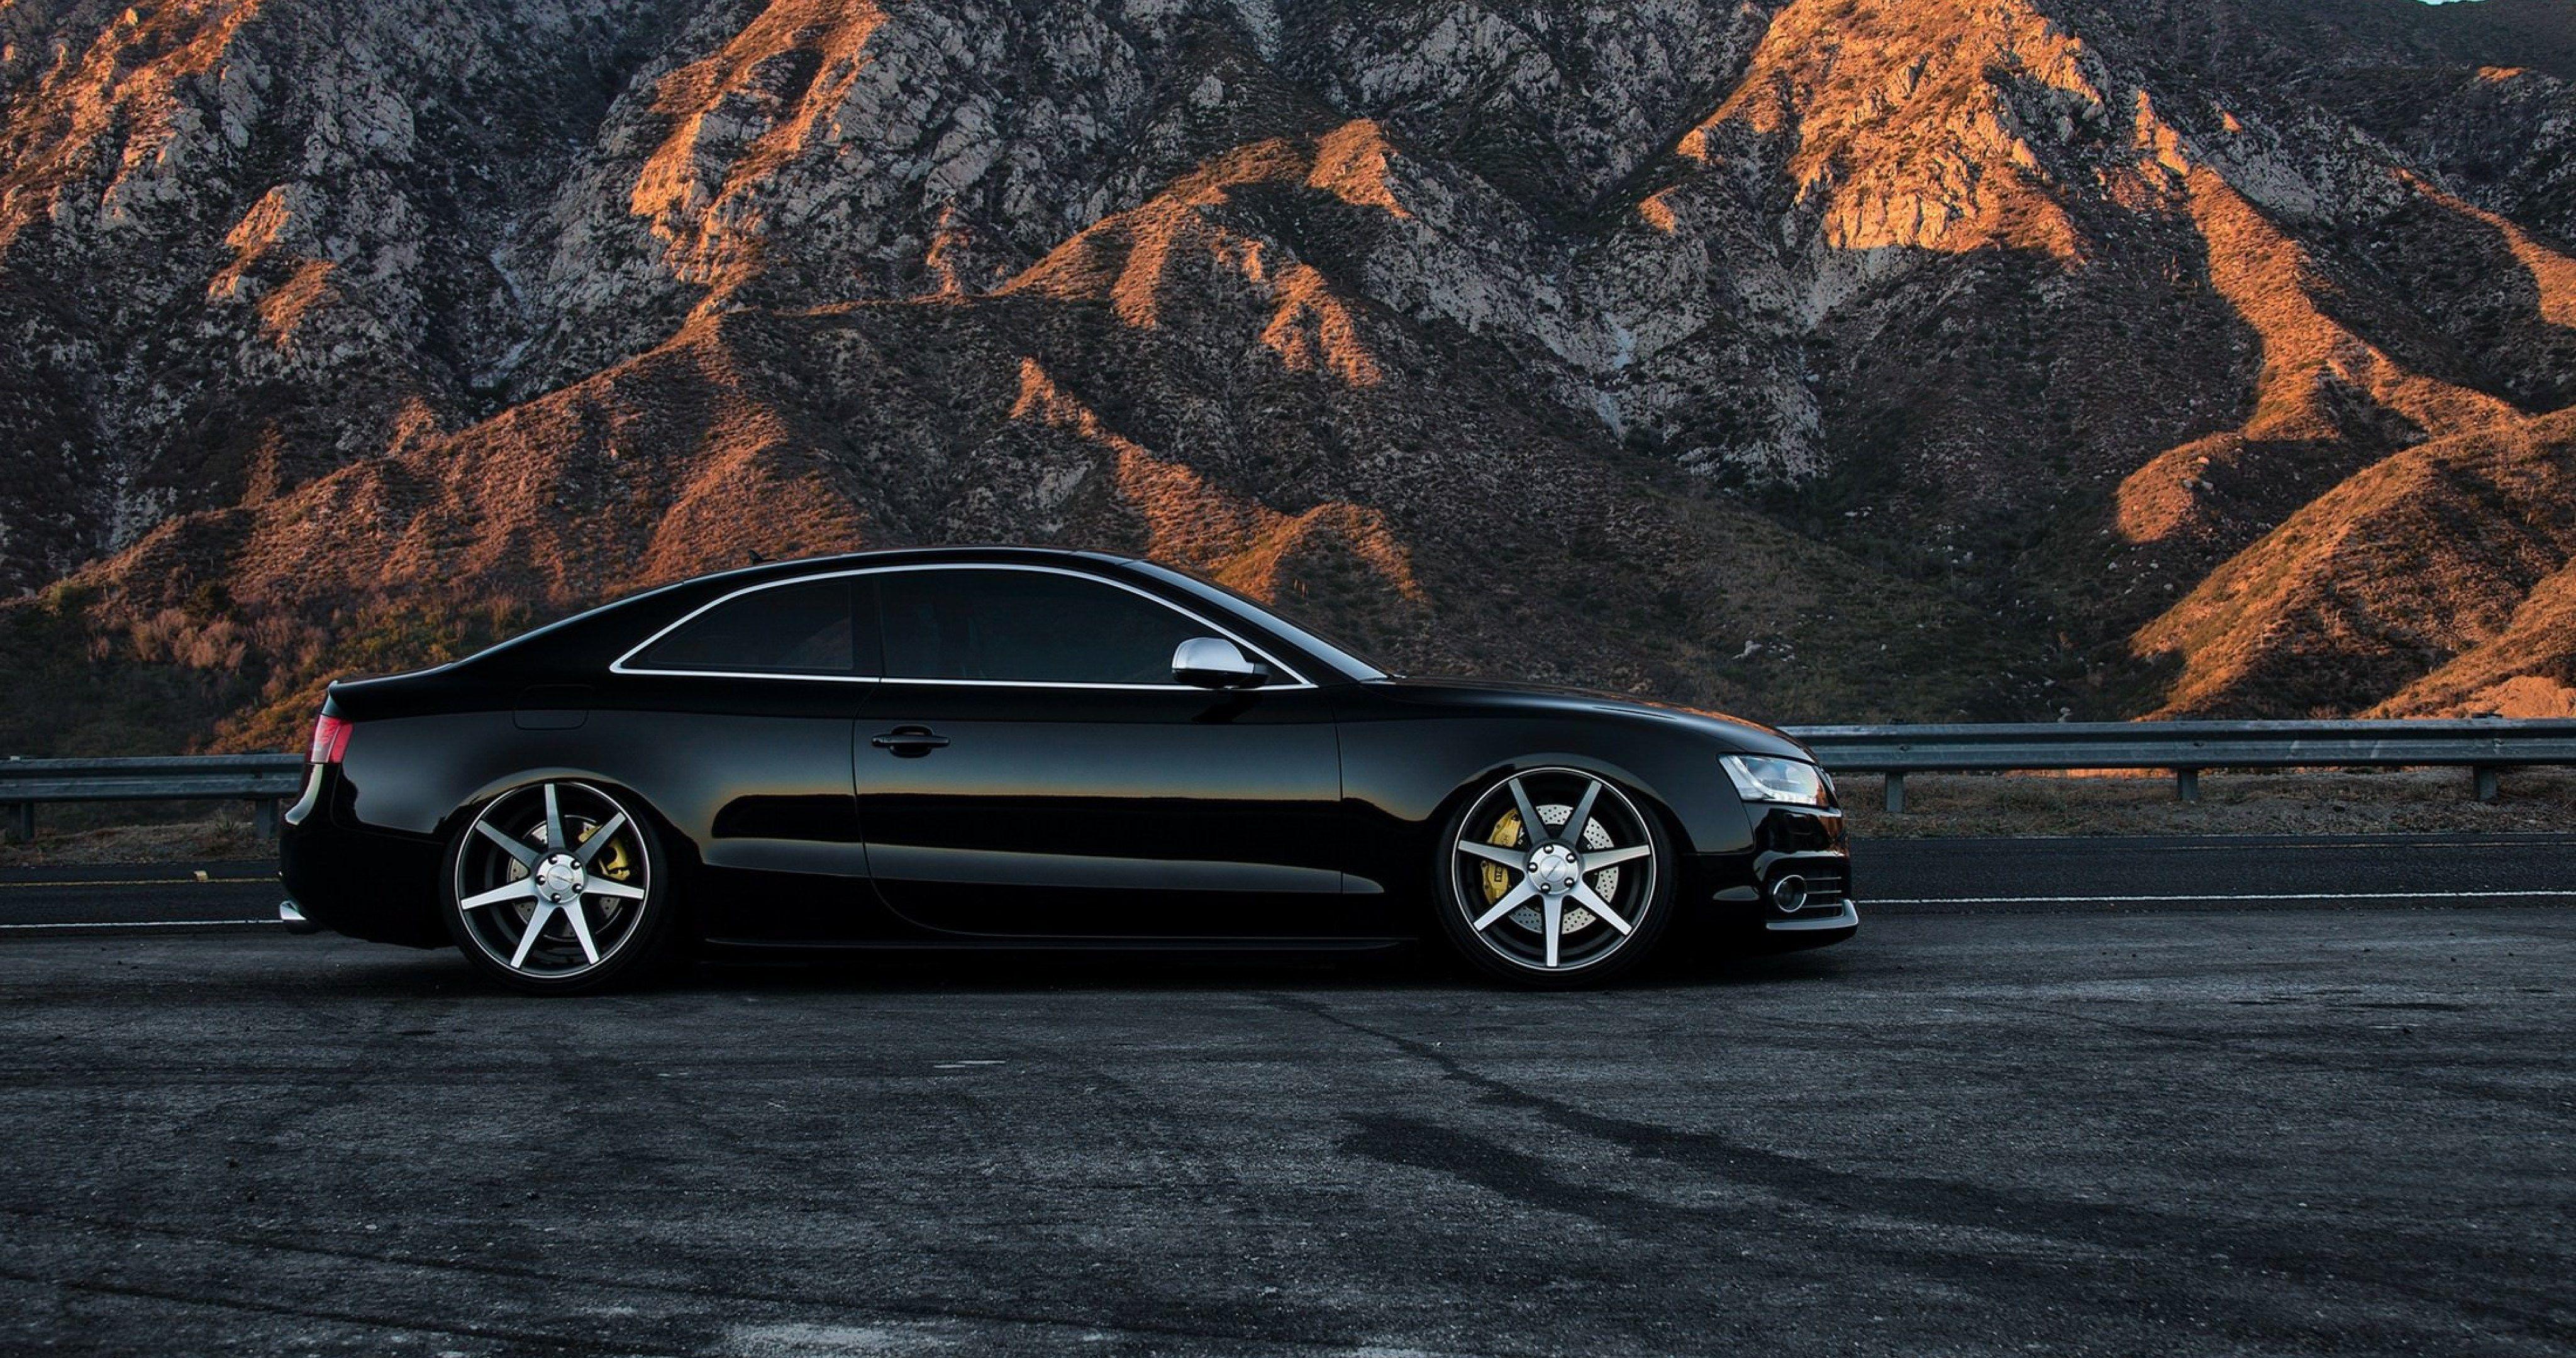 Audi S5 Wallpapers Top Free Audi S5 Backgrounds Wallpaperaccess